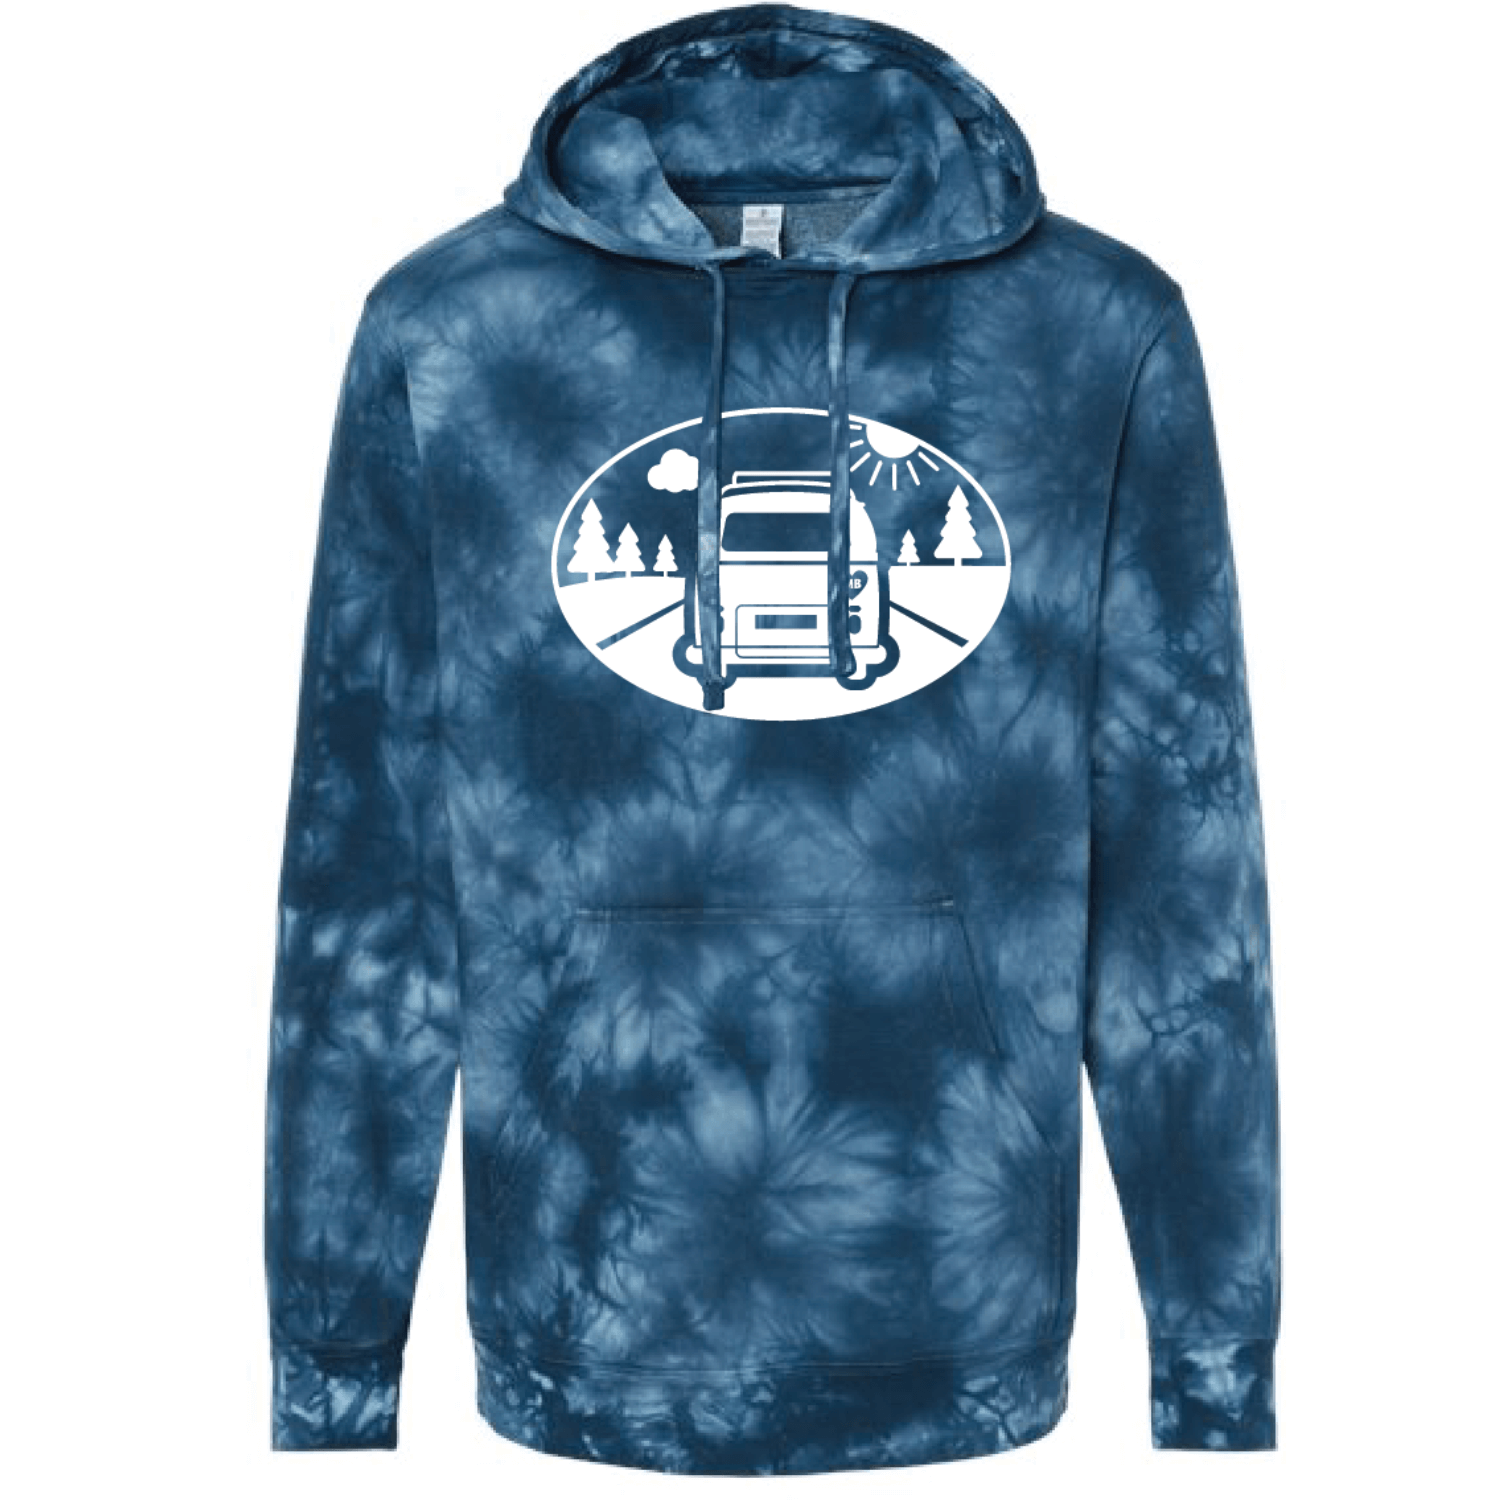 We Heart WinnipegCAA Exclusive: We Heart Winnipeg Open Roads Hoodie Navy Tie DyeShirts & Tops1019543 - See All Featured Collection products